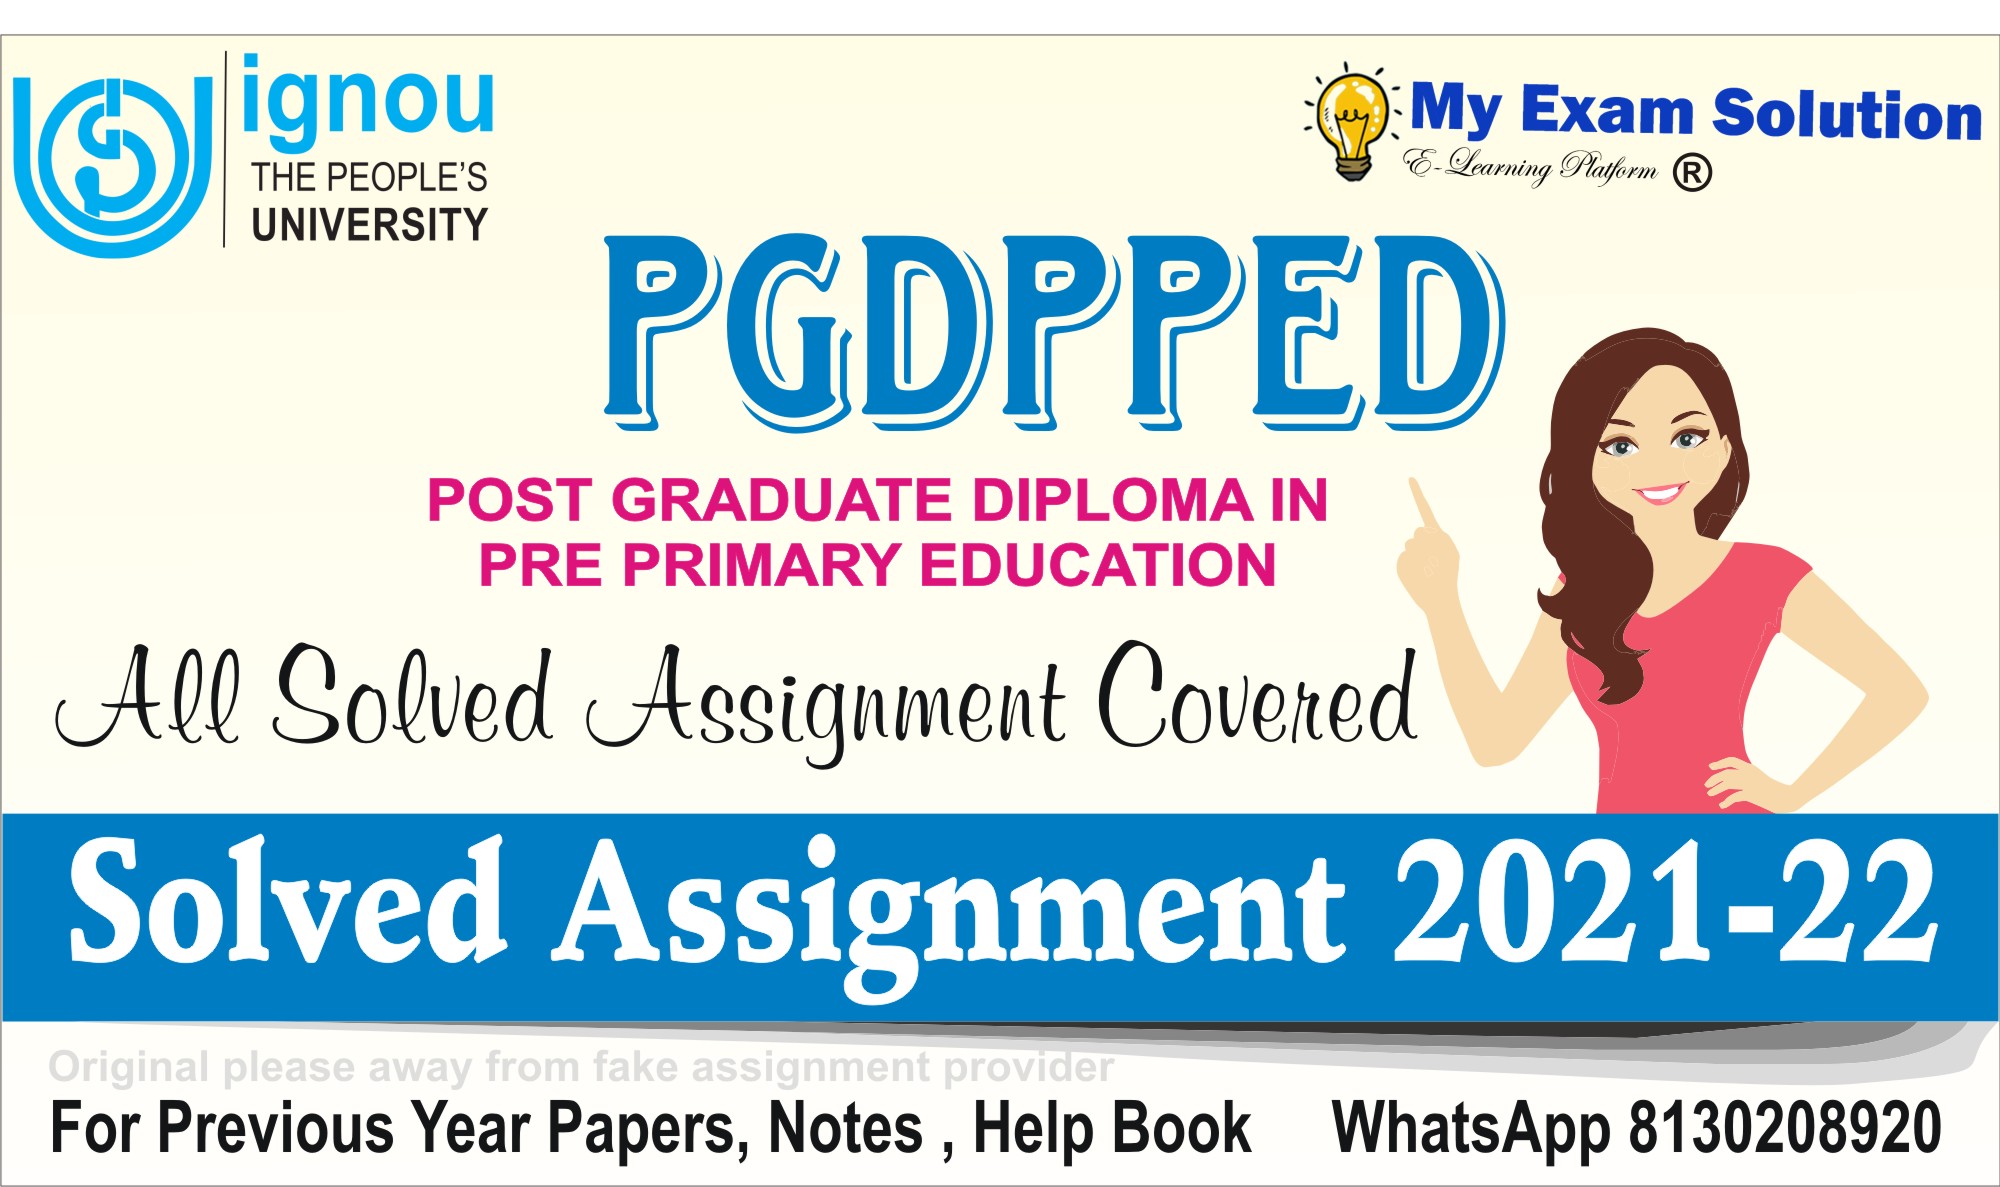 ignou assignment solved 2021 22